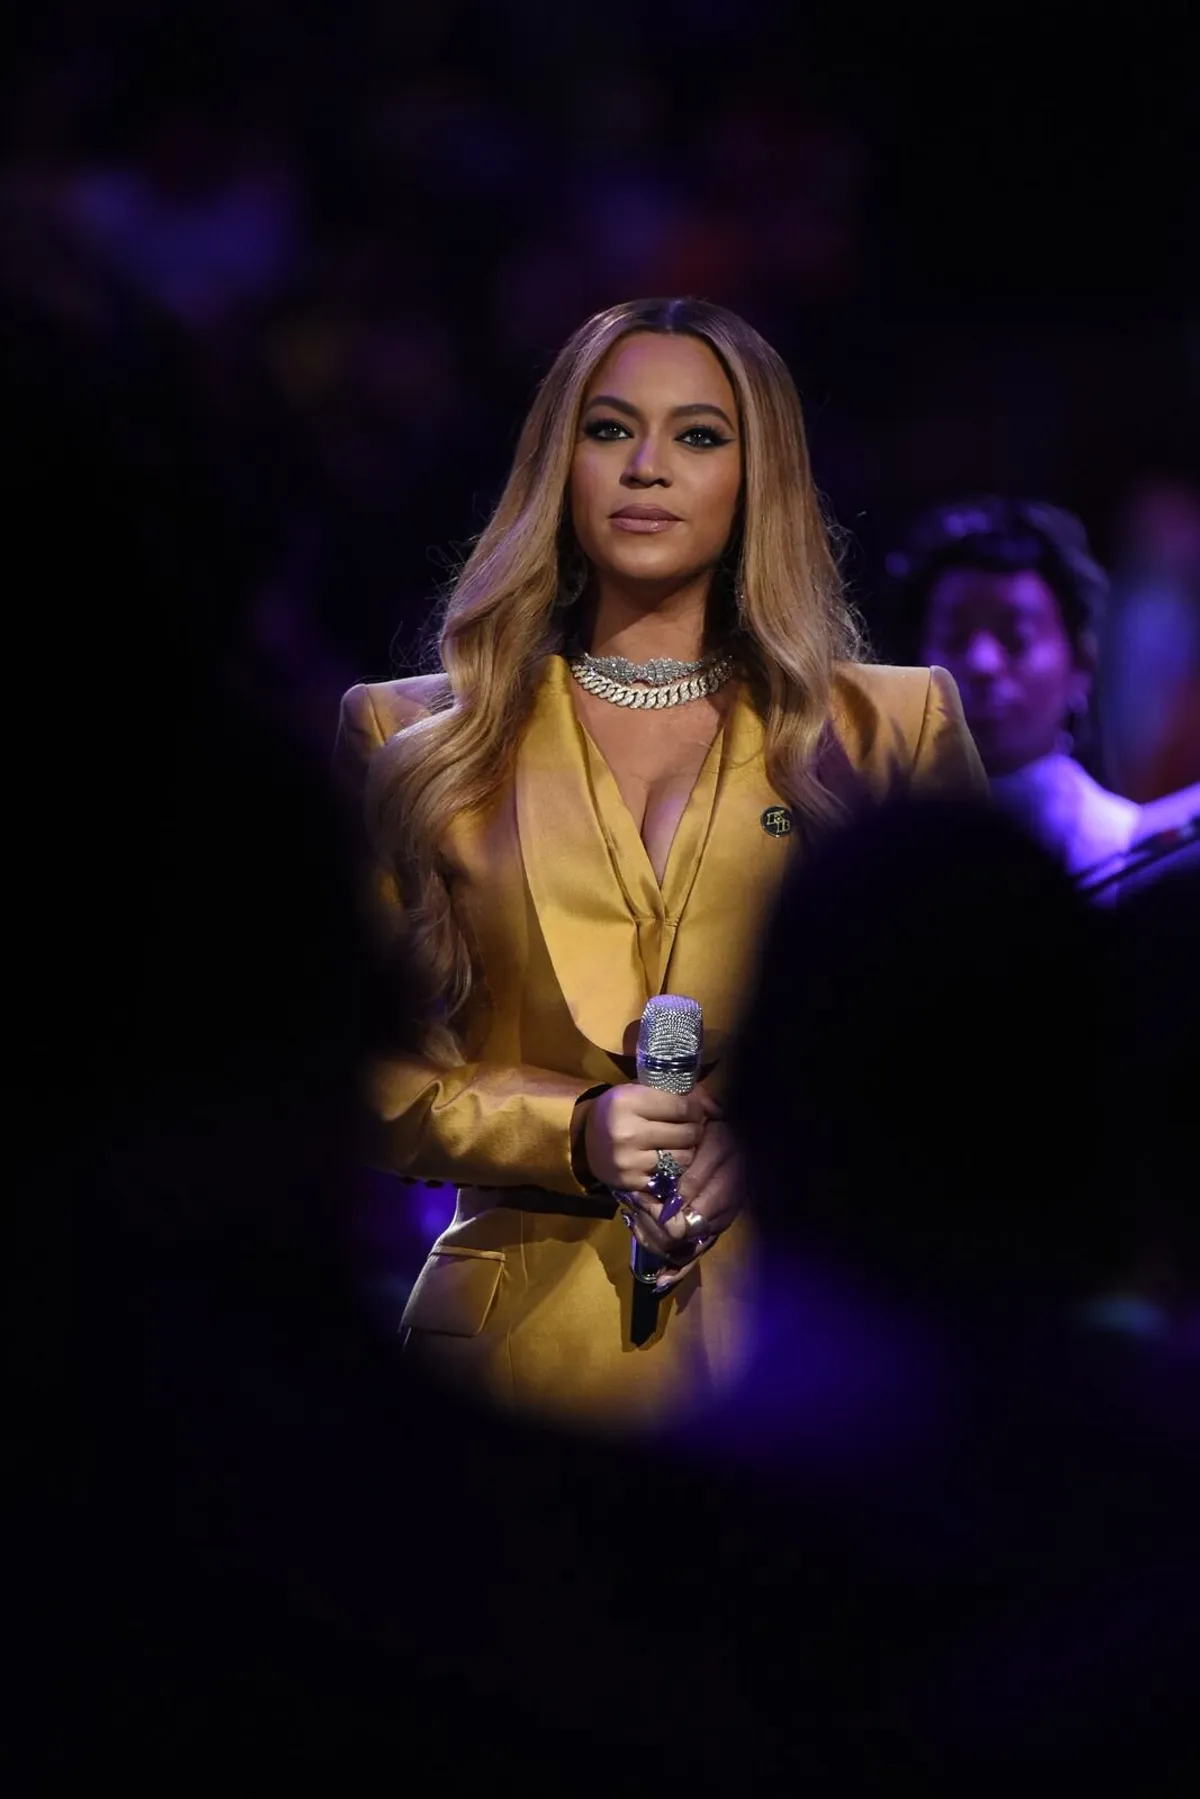 Beyoncé Slays Rocking a Cleavage-Revealing White Suit with Gold Chains ...